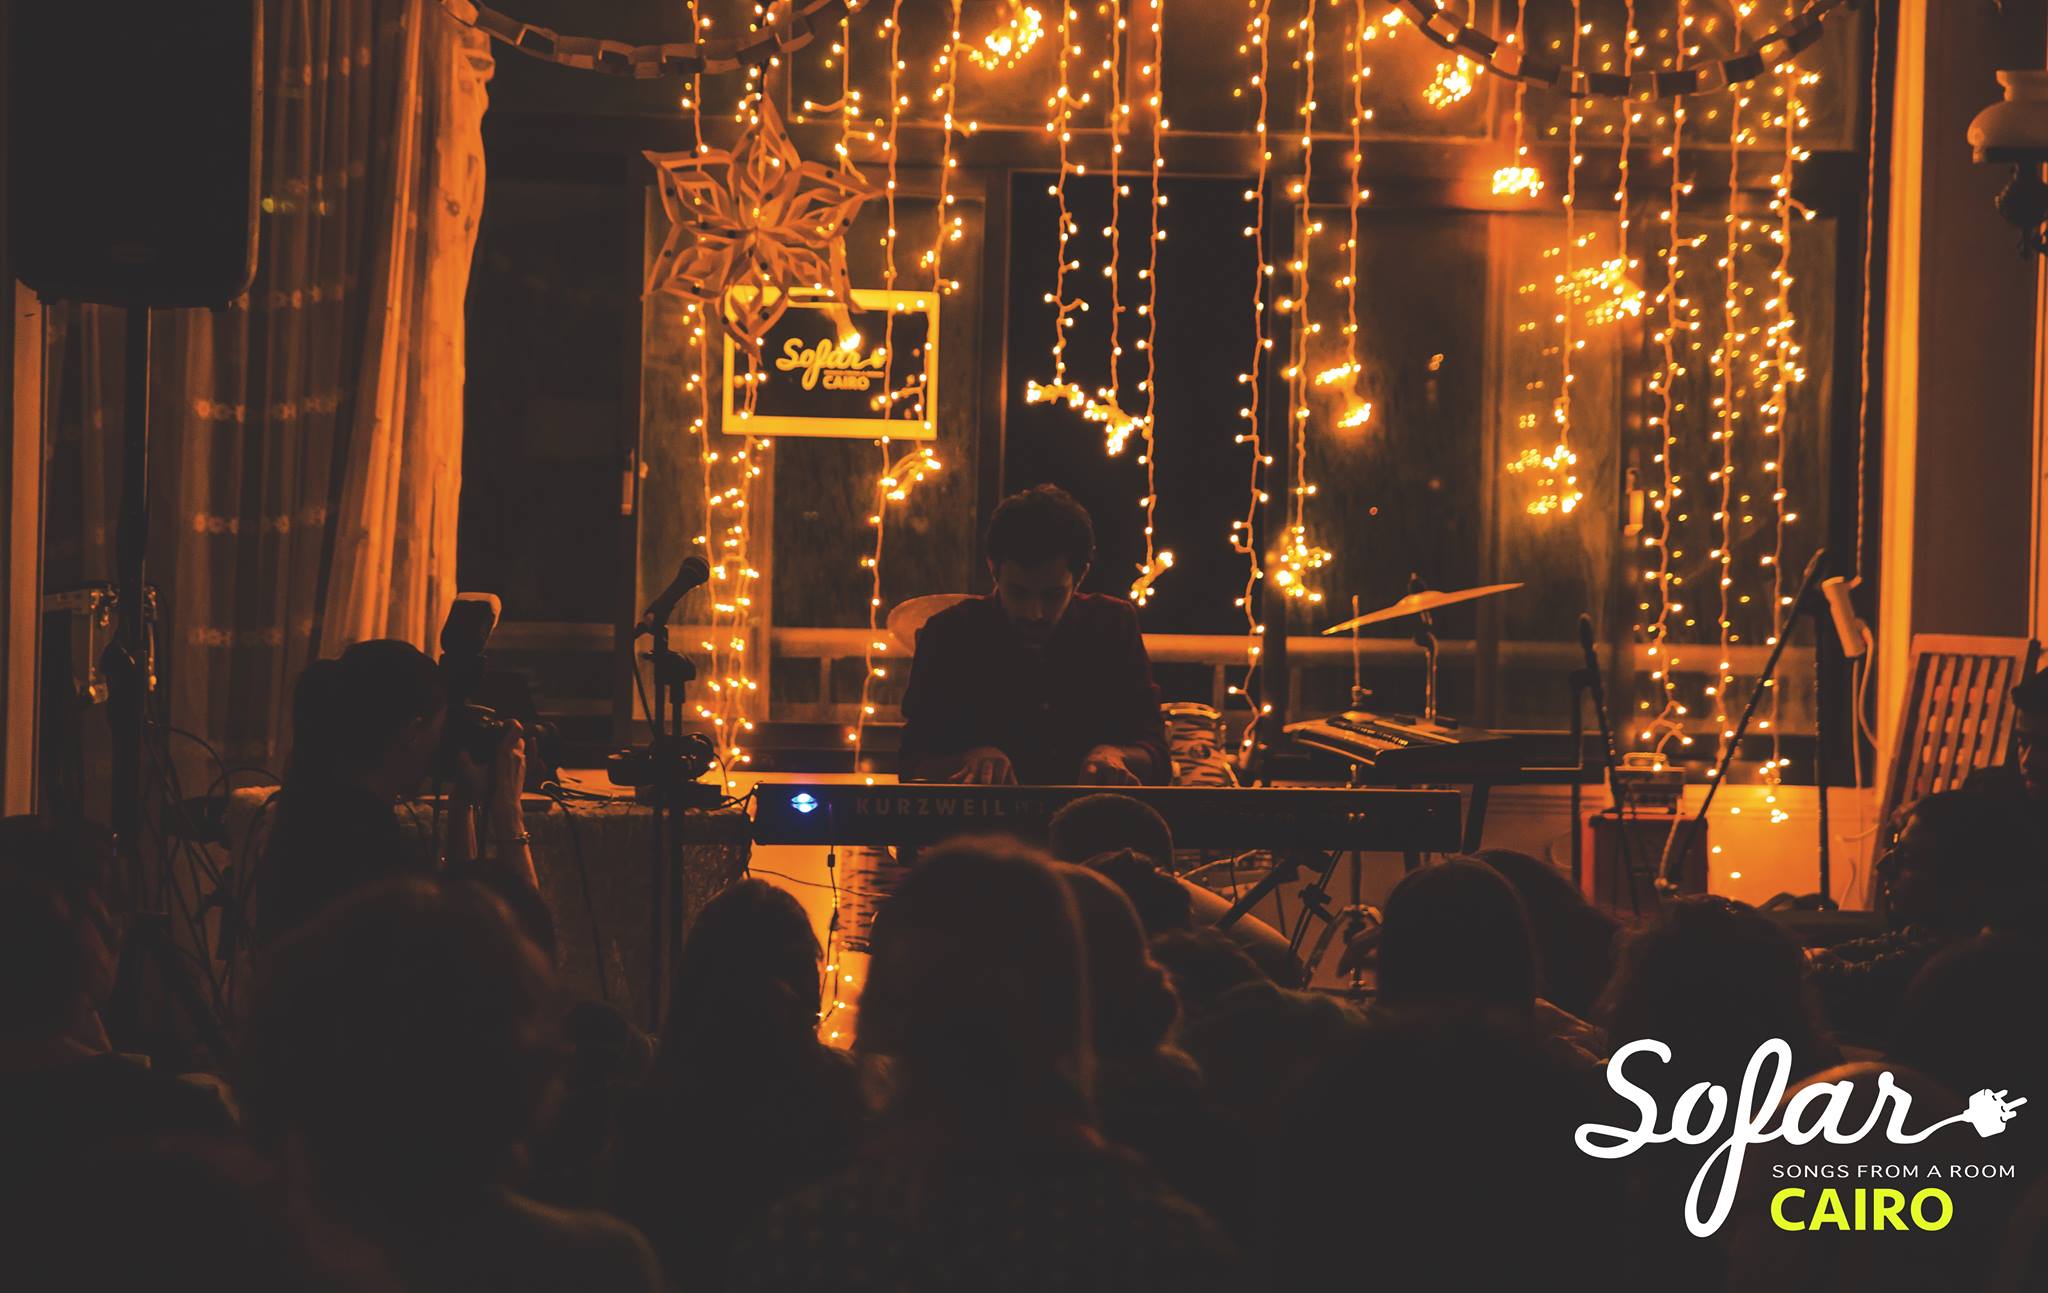 Sofar Sounds is Back and You Can't Know Where it is